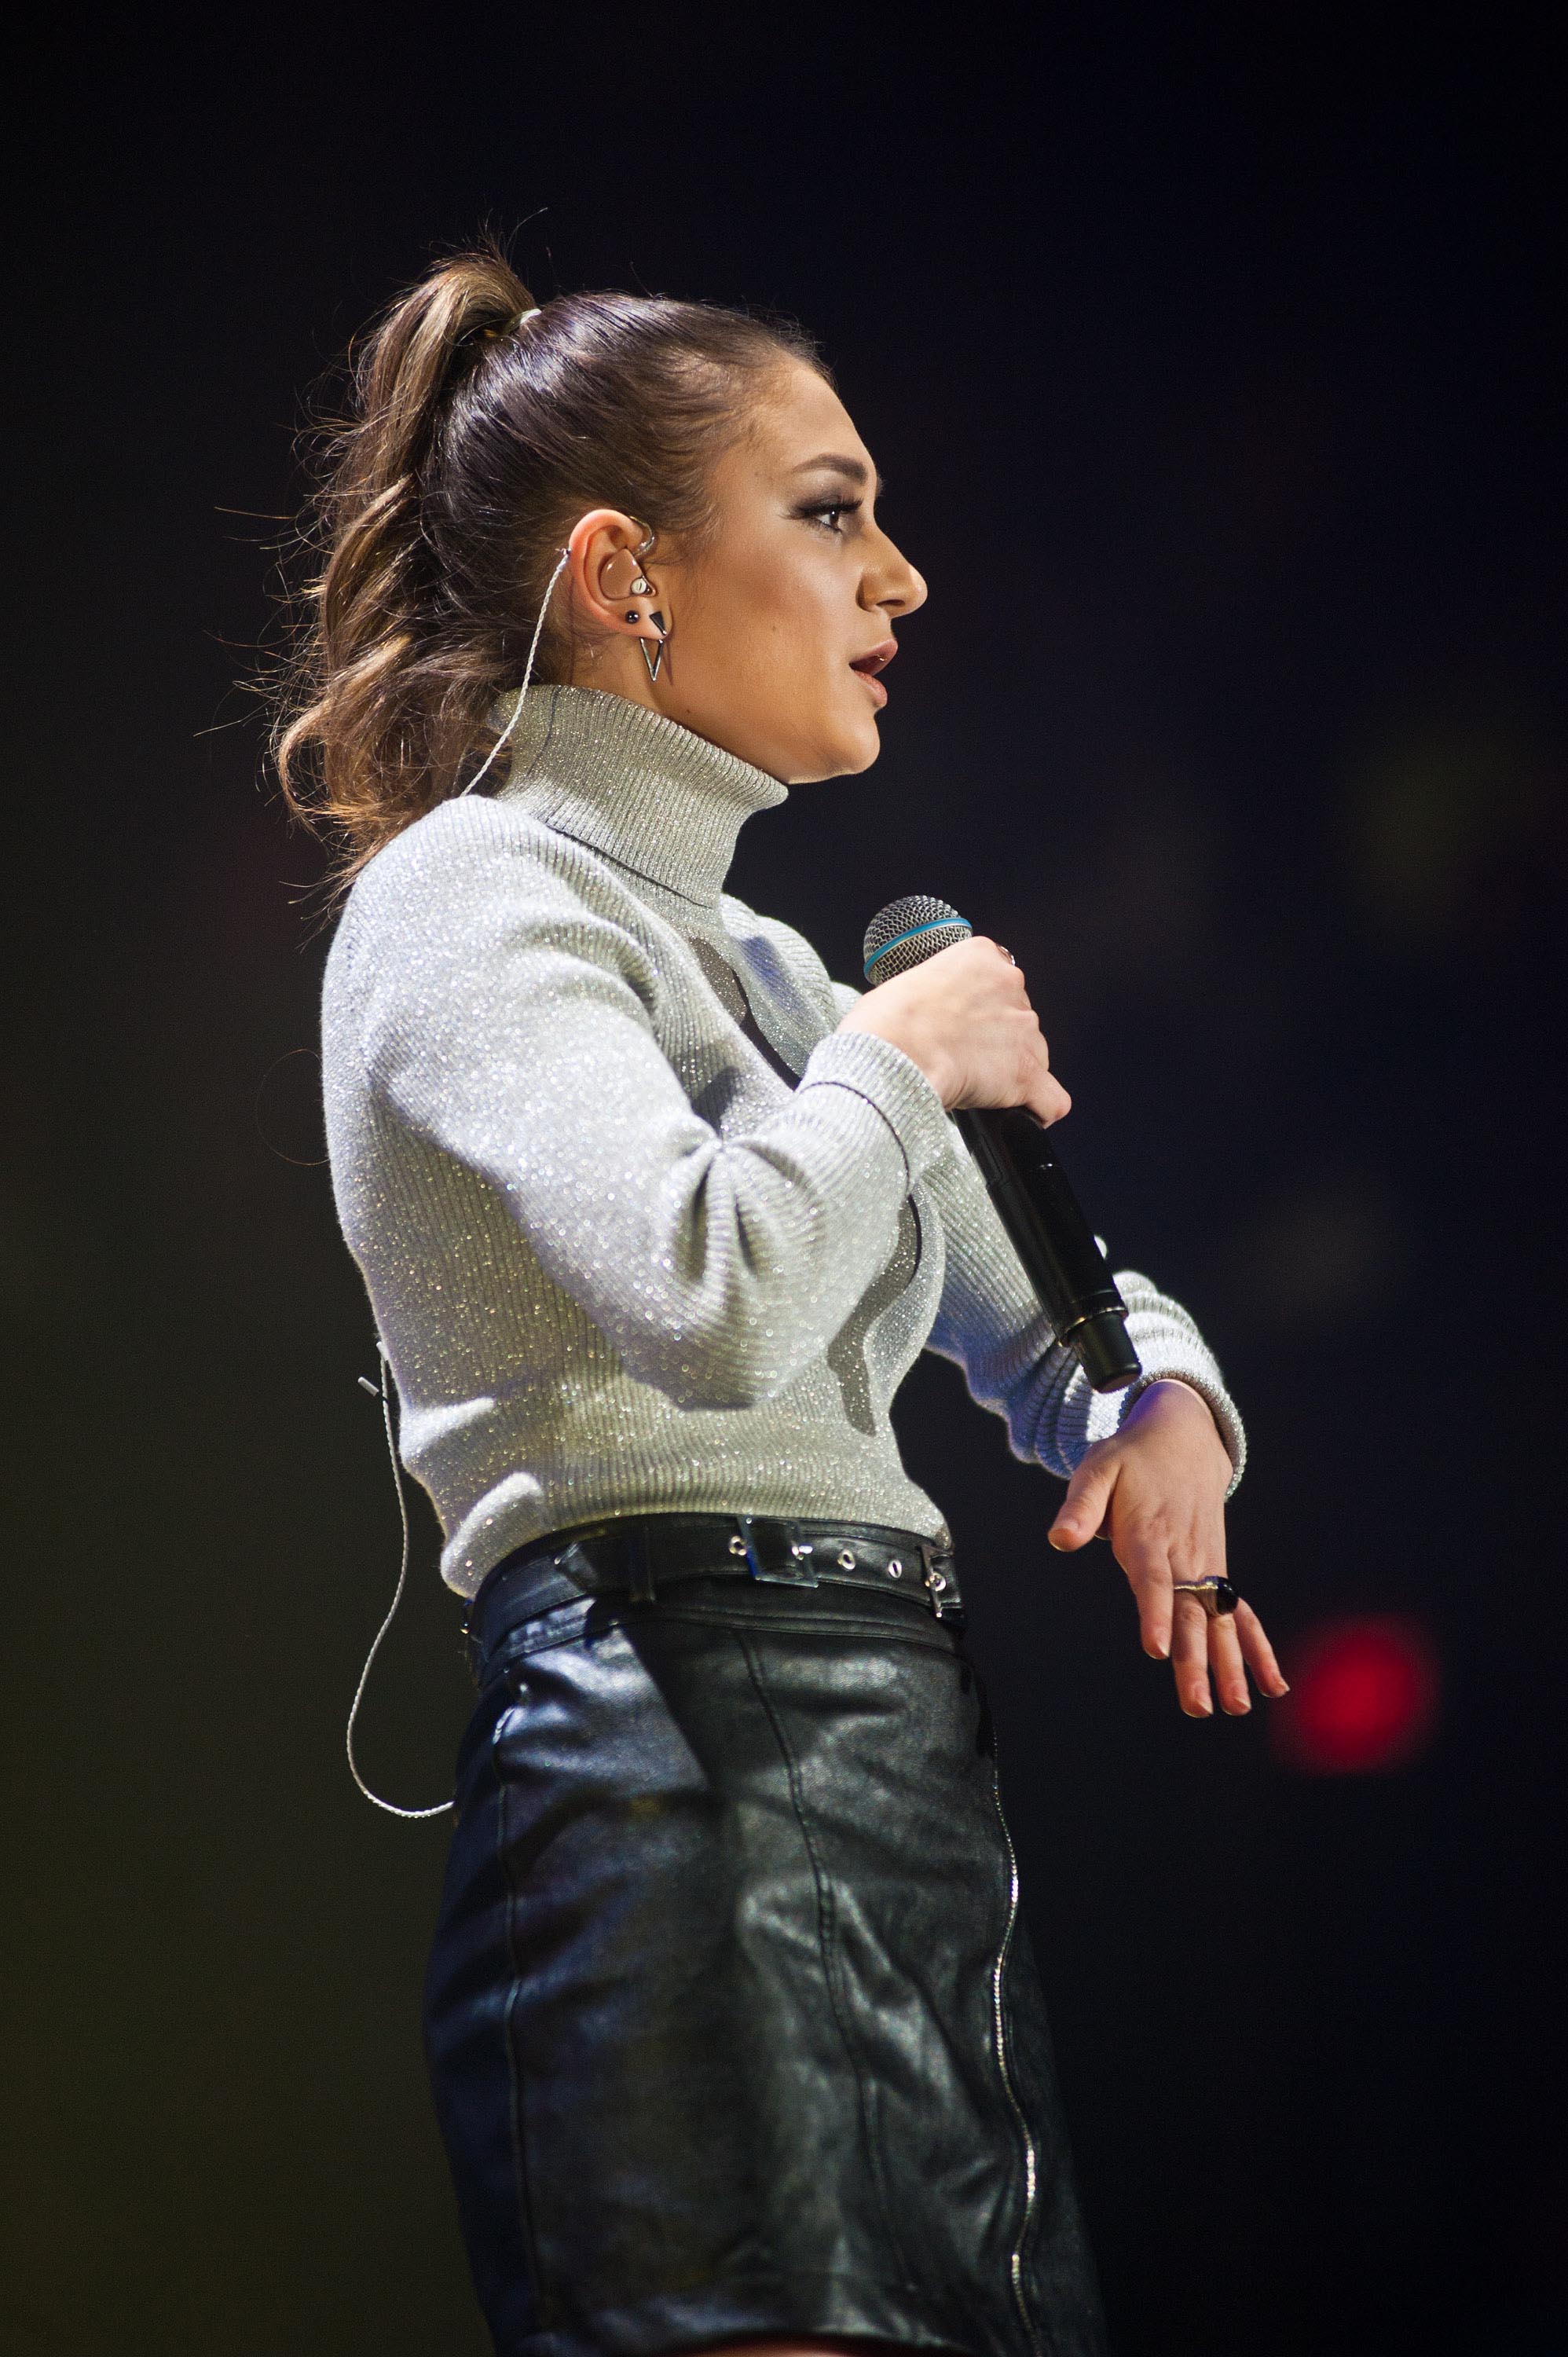 Daya performs onstage during 103.5 KISS FM’s Jingle Ball 2016